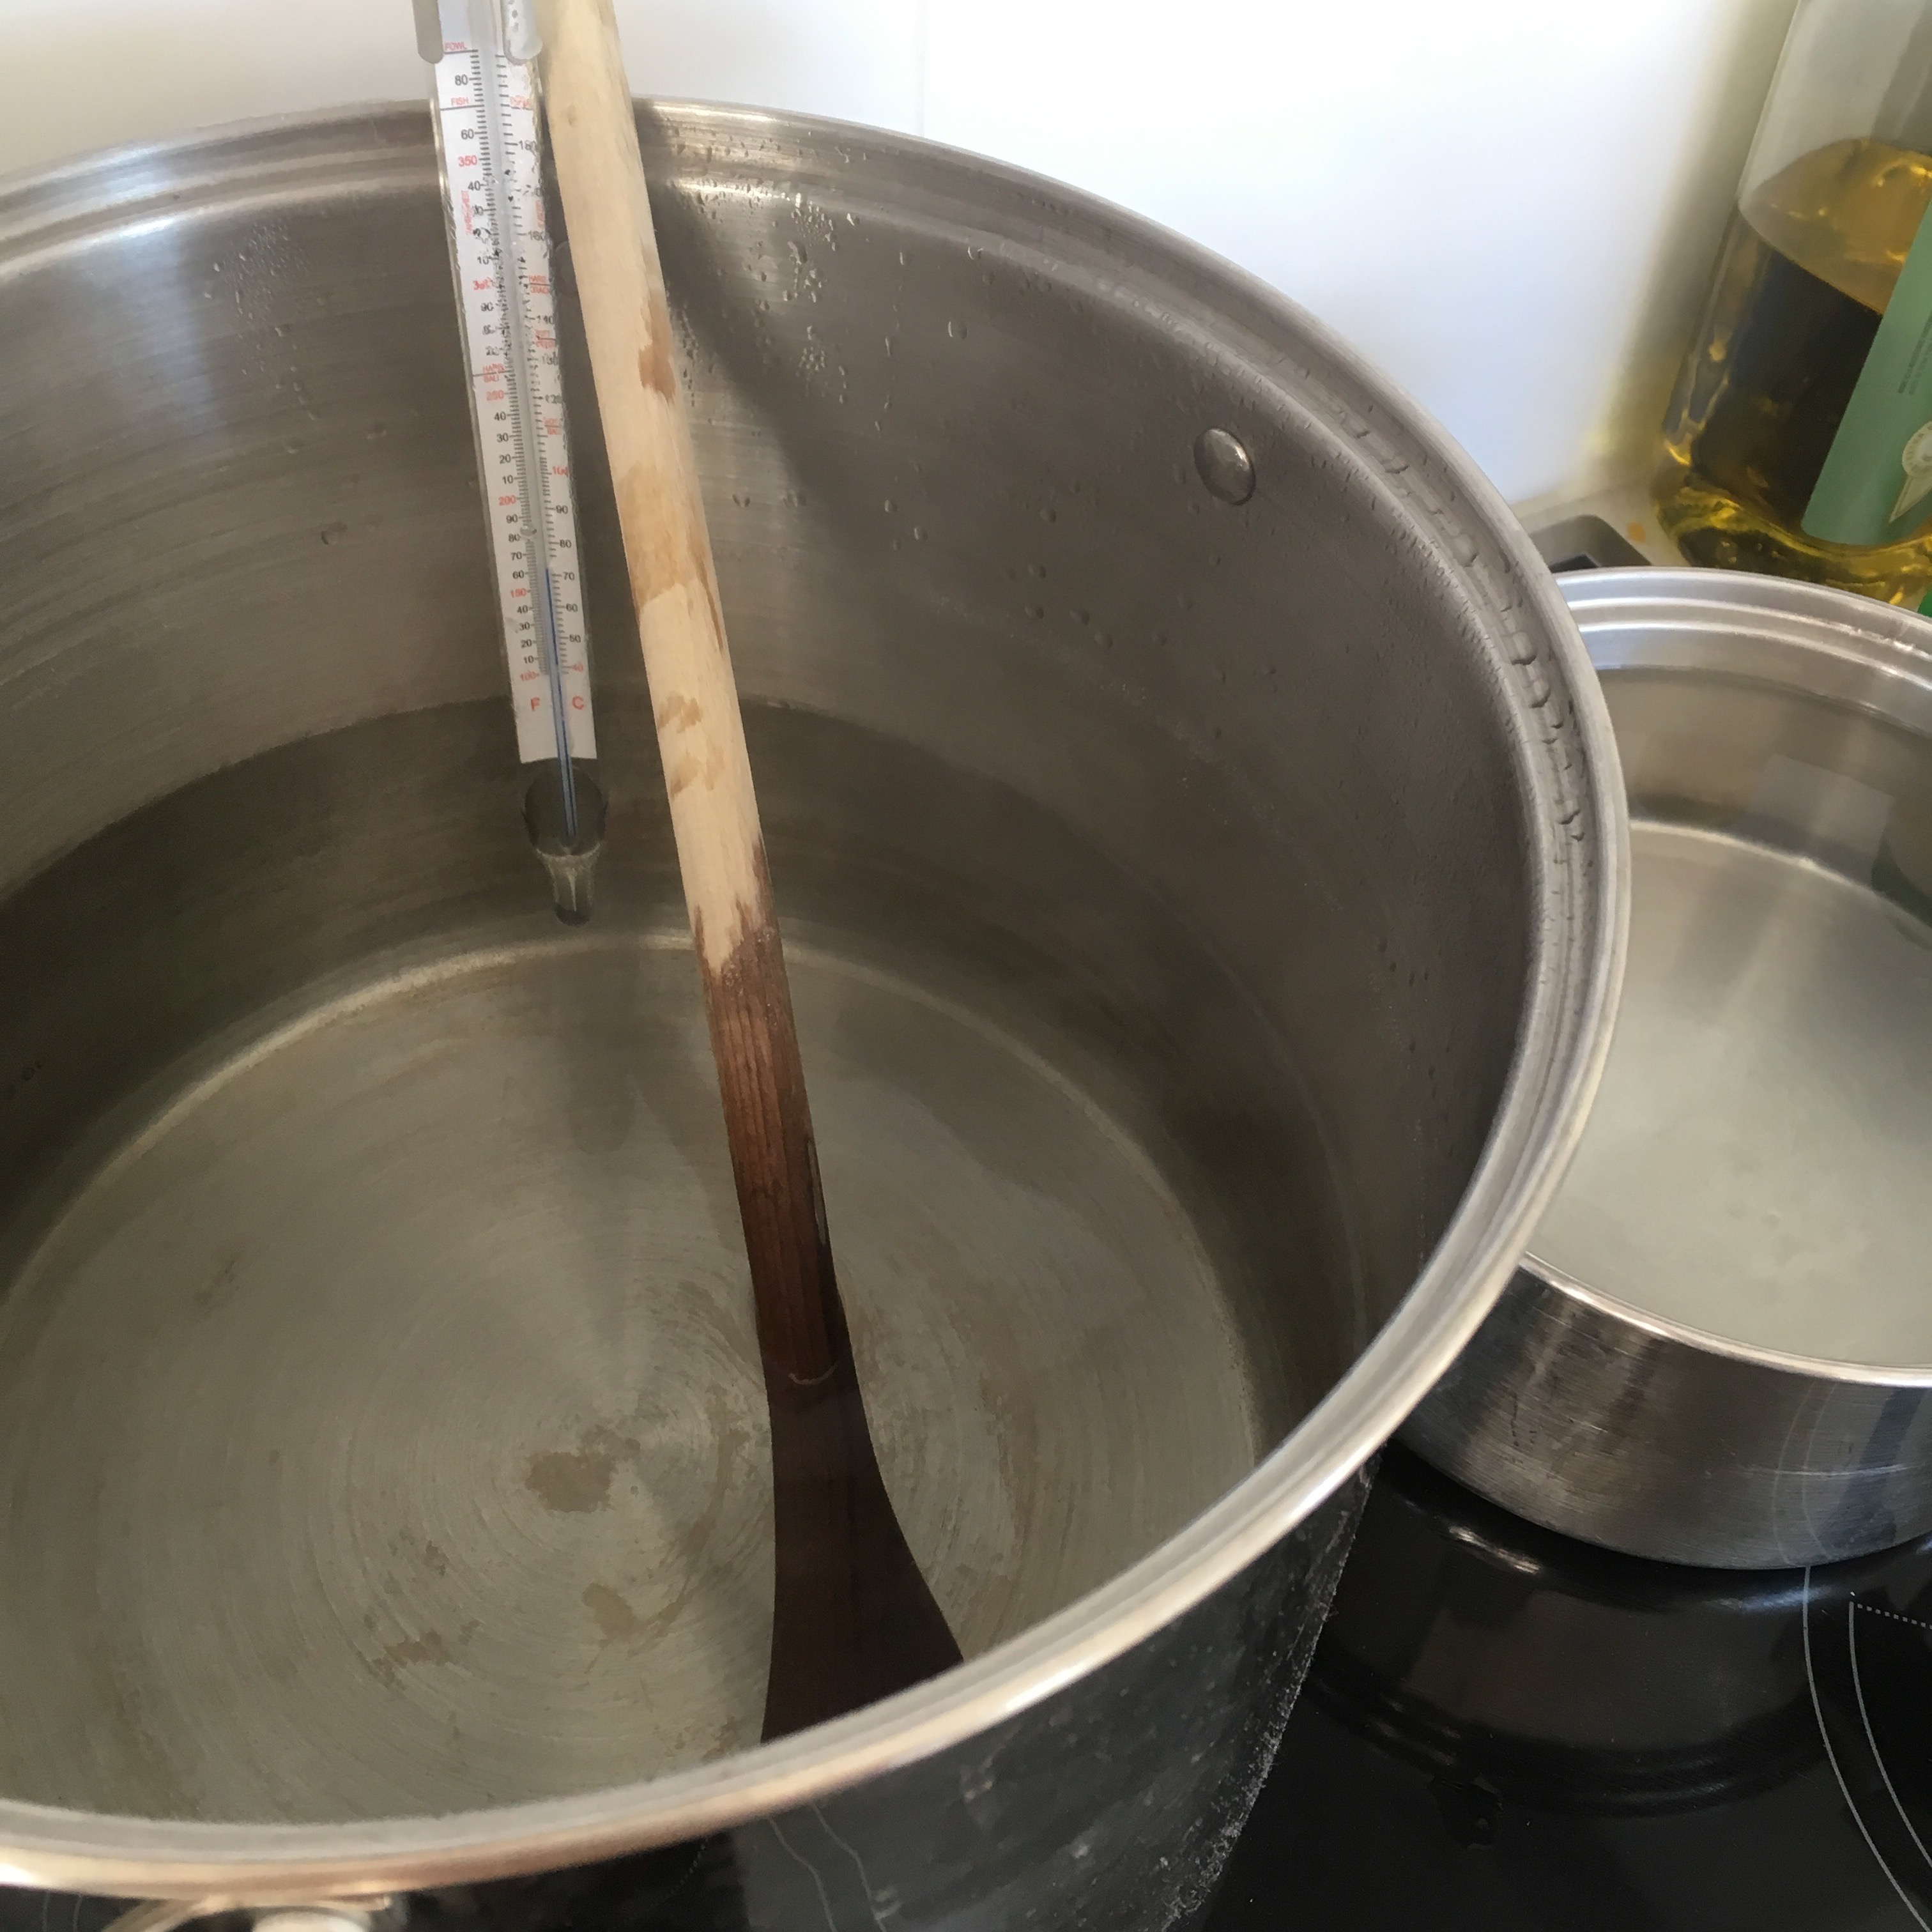 Split some of the water into another pot to be used later for sparging